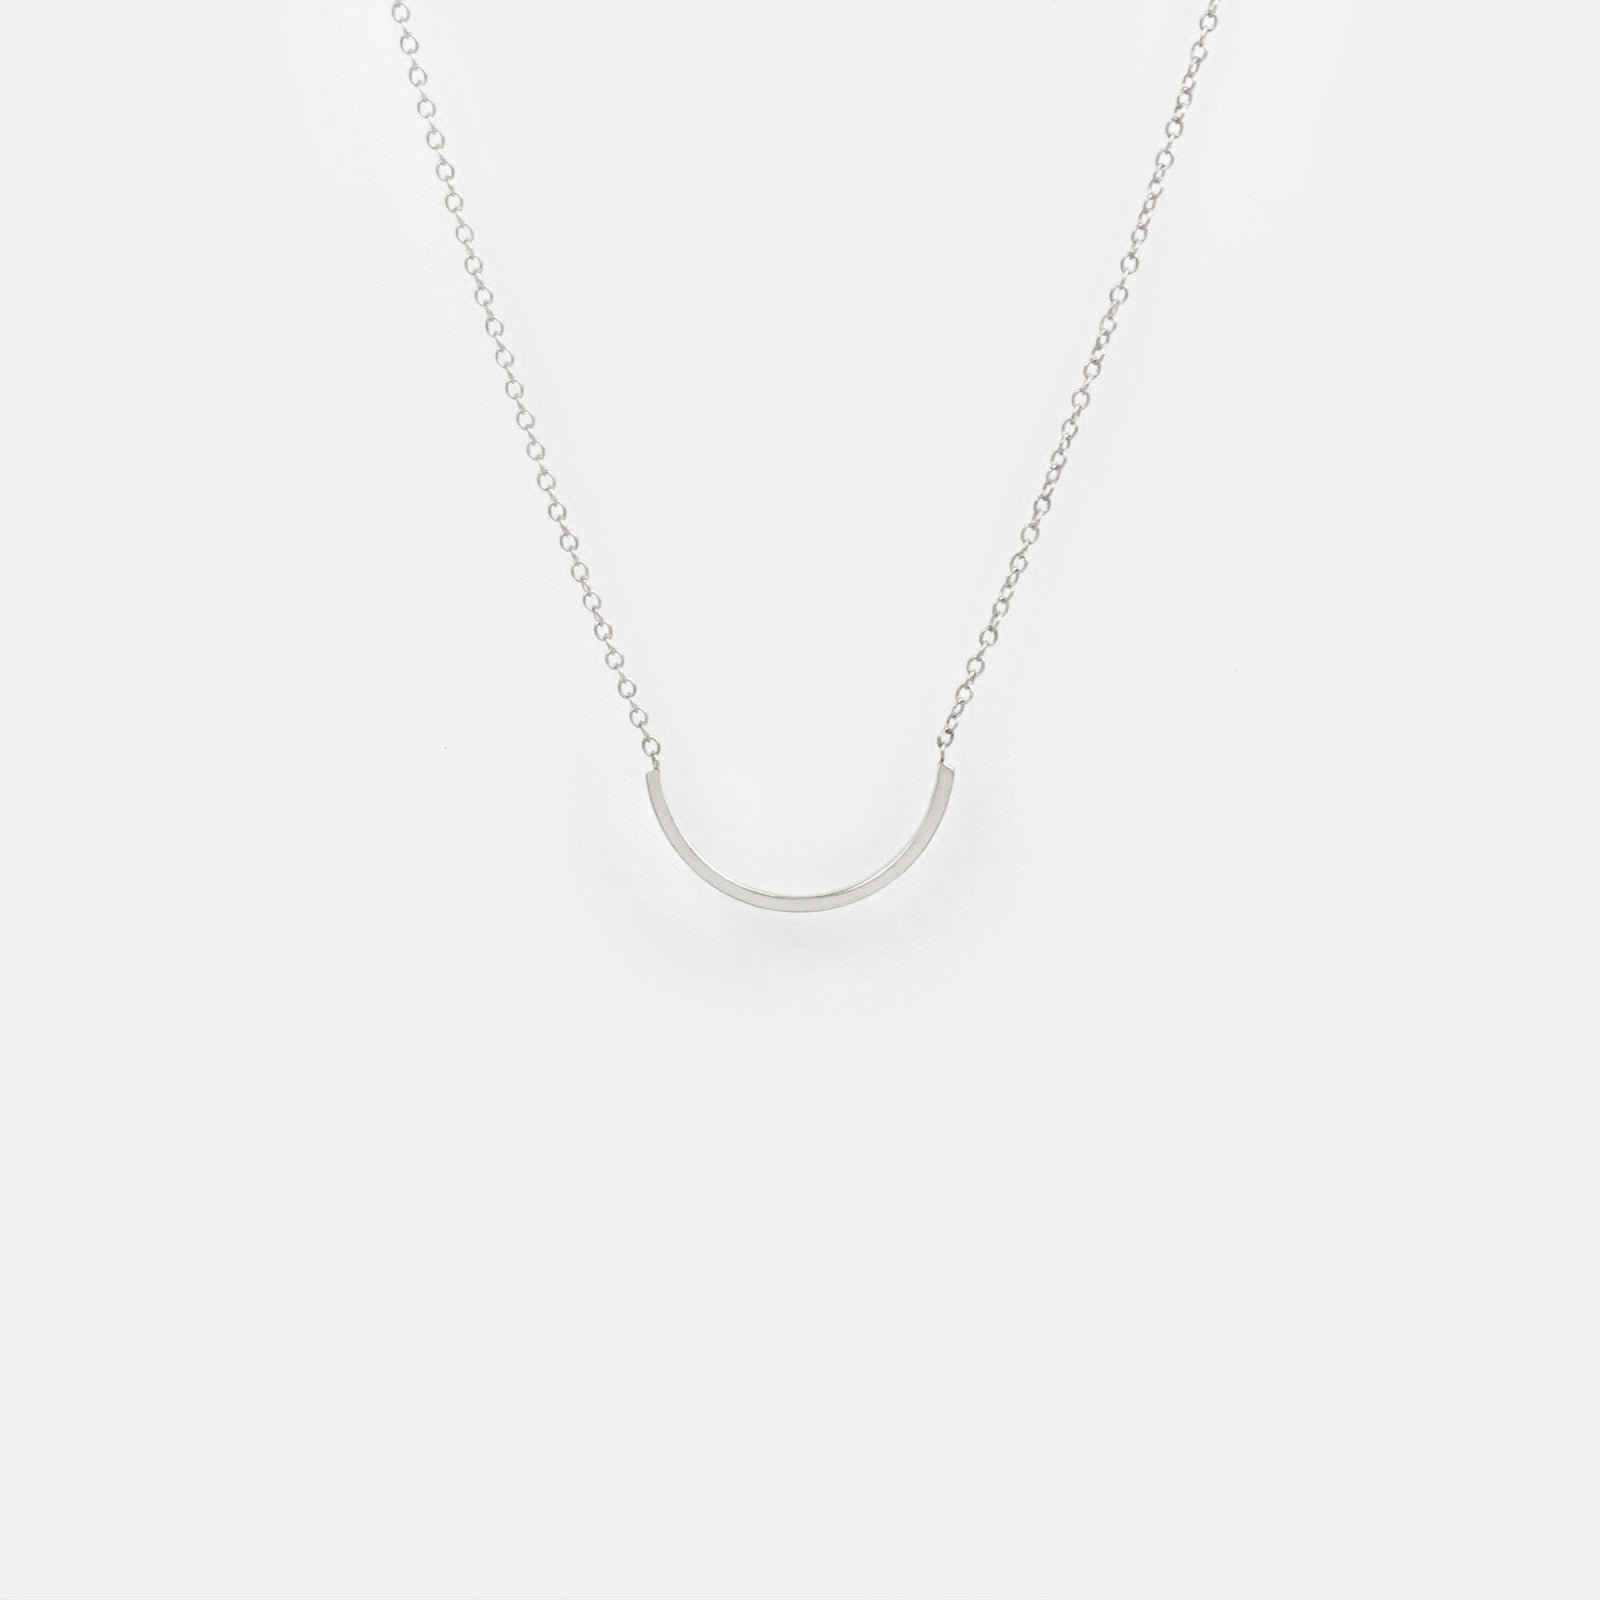 Uva Minimal Necklace in Sterling Silver By SHW Fine Jewelry NYC